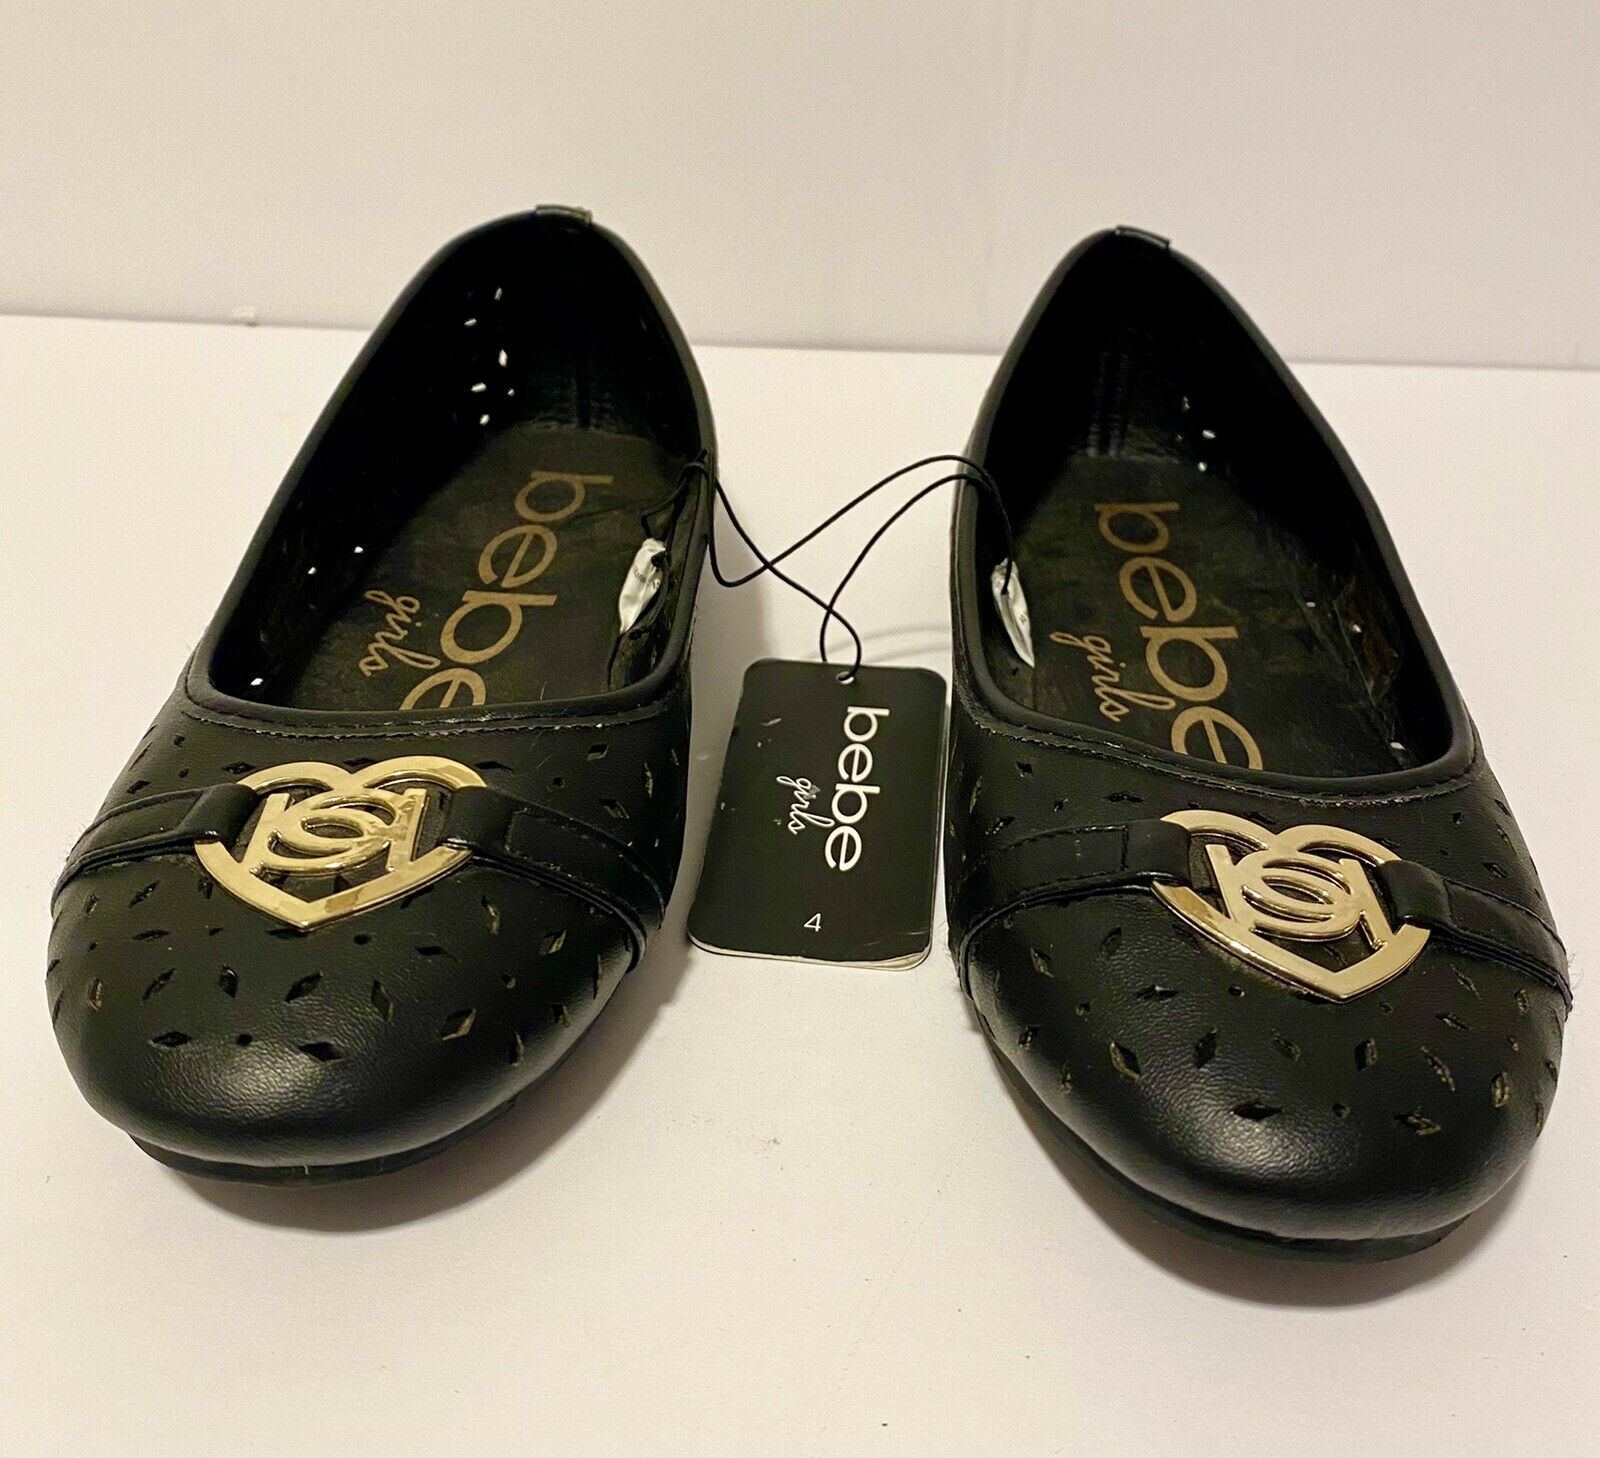 Bebe Girls Dress Shoes Flats Black & Gold Size 4 New With Tags